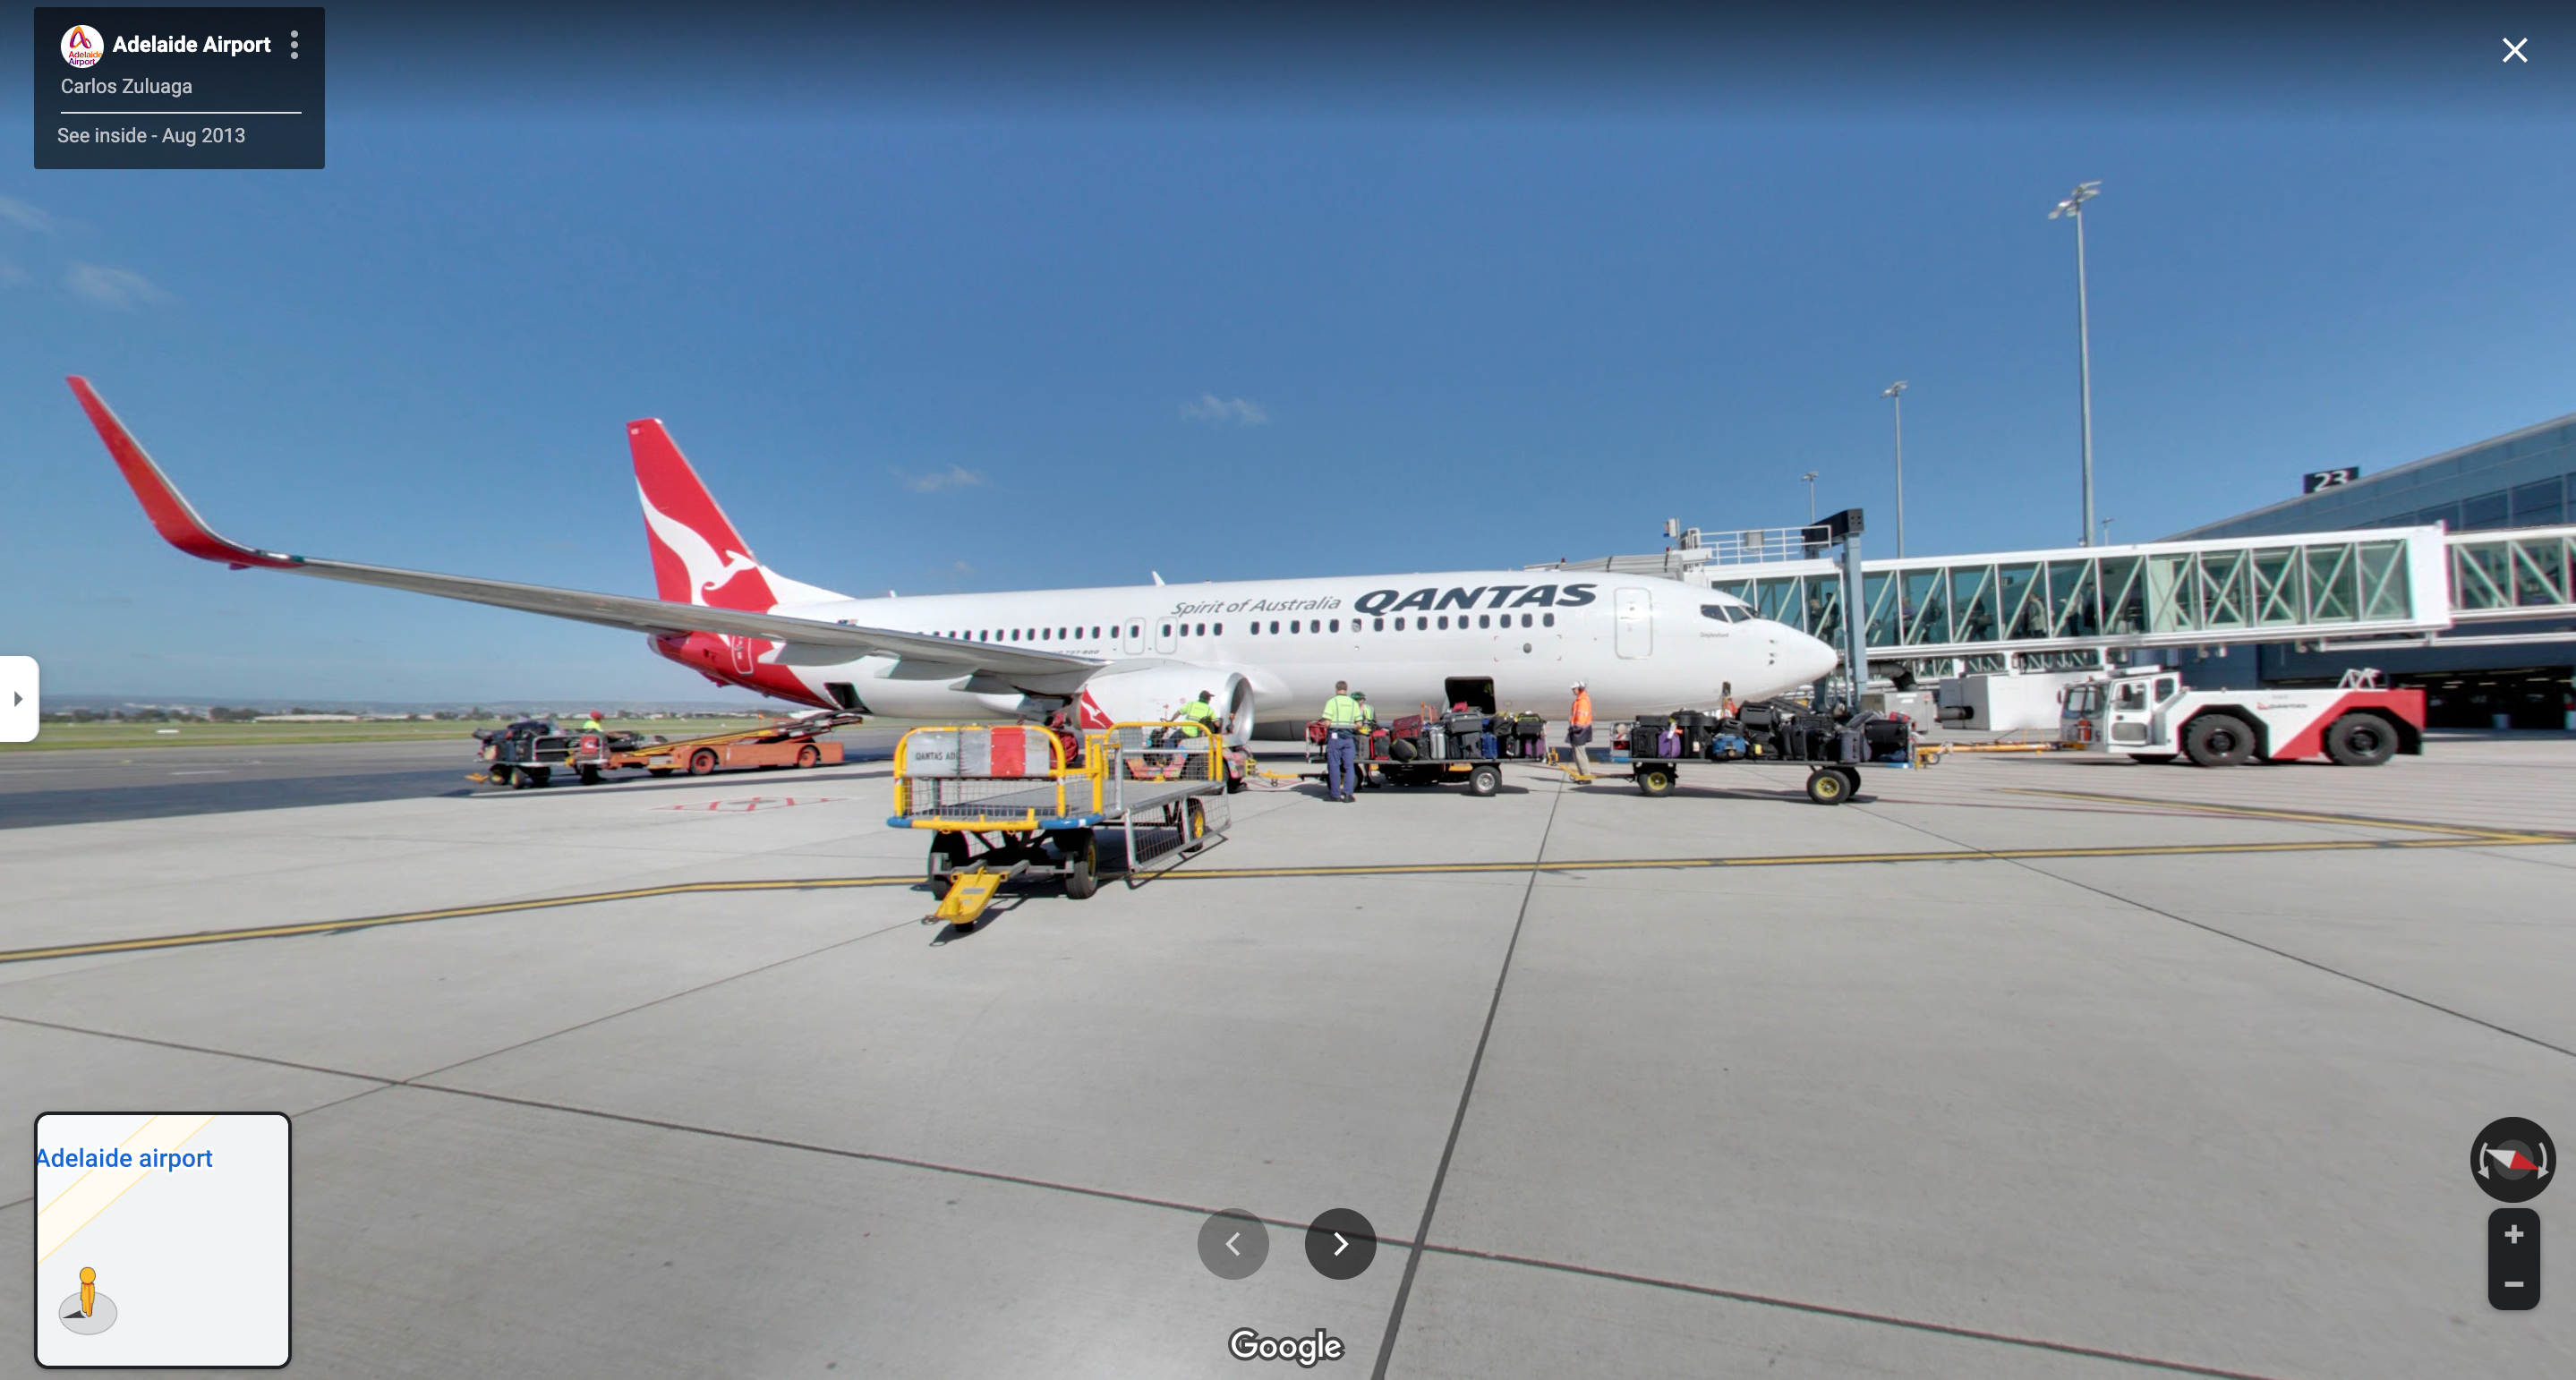 Adelaide Airport Google Street View